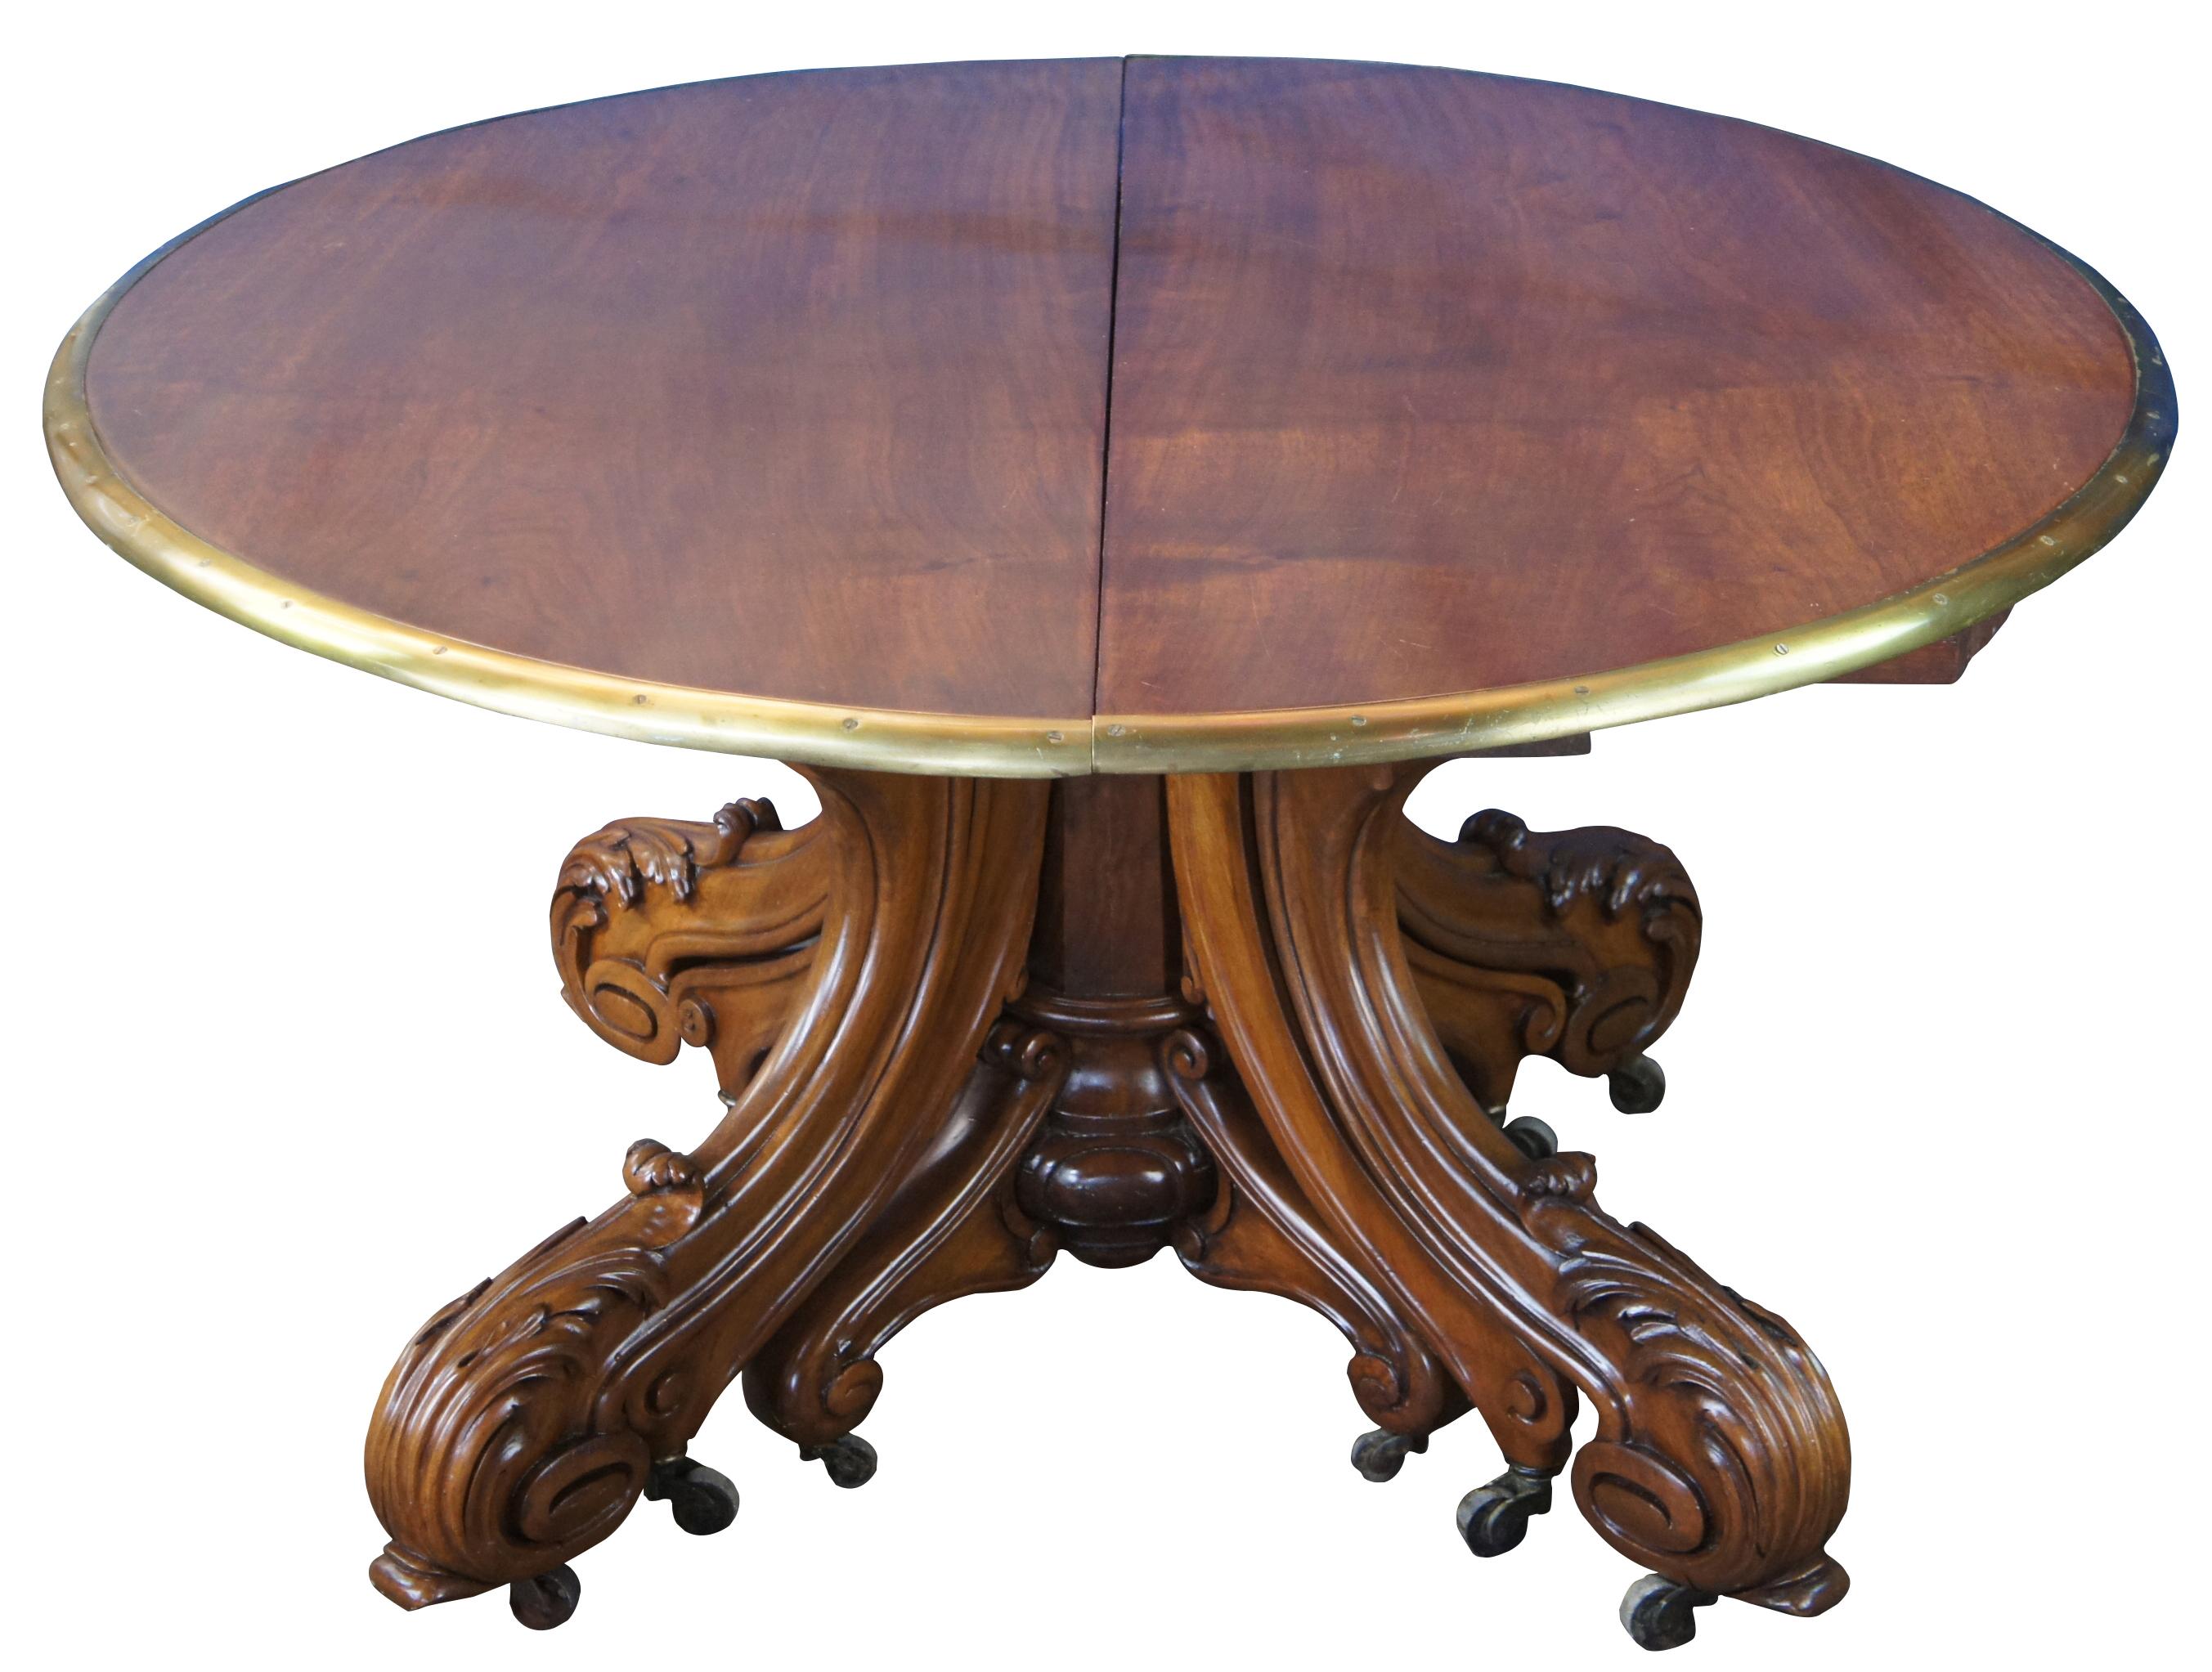 A fine and impressive round extendable museum quality conference or dining table, circa 1850s. Made from solid walnut with 3 stage extendable brass banded top Features acanthus scrolled and carved legs as well as casters for ease of opening. The 8